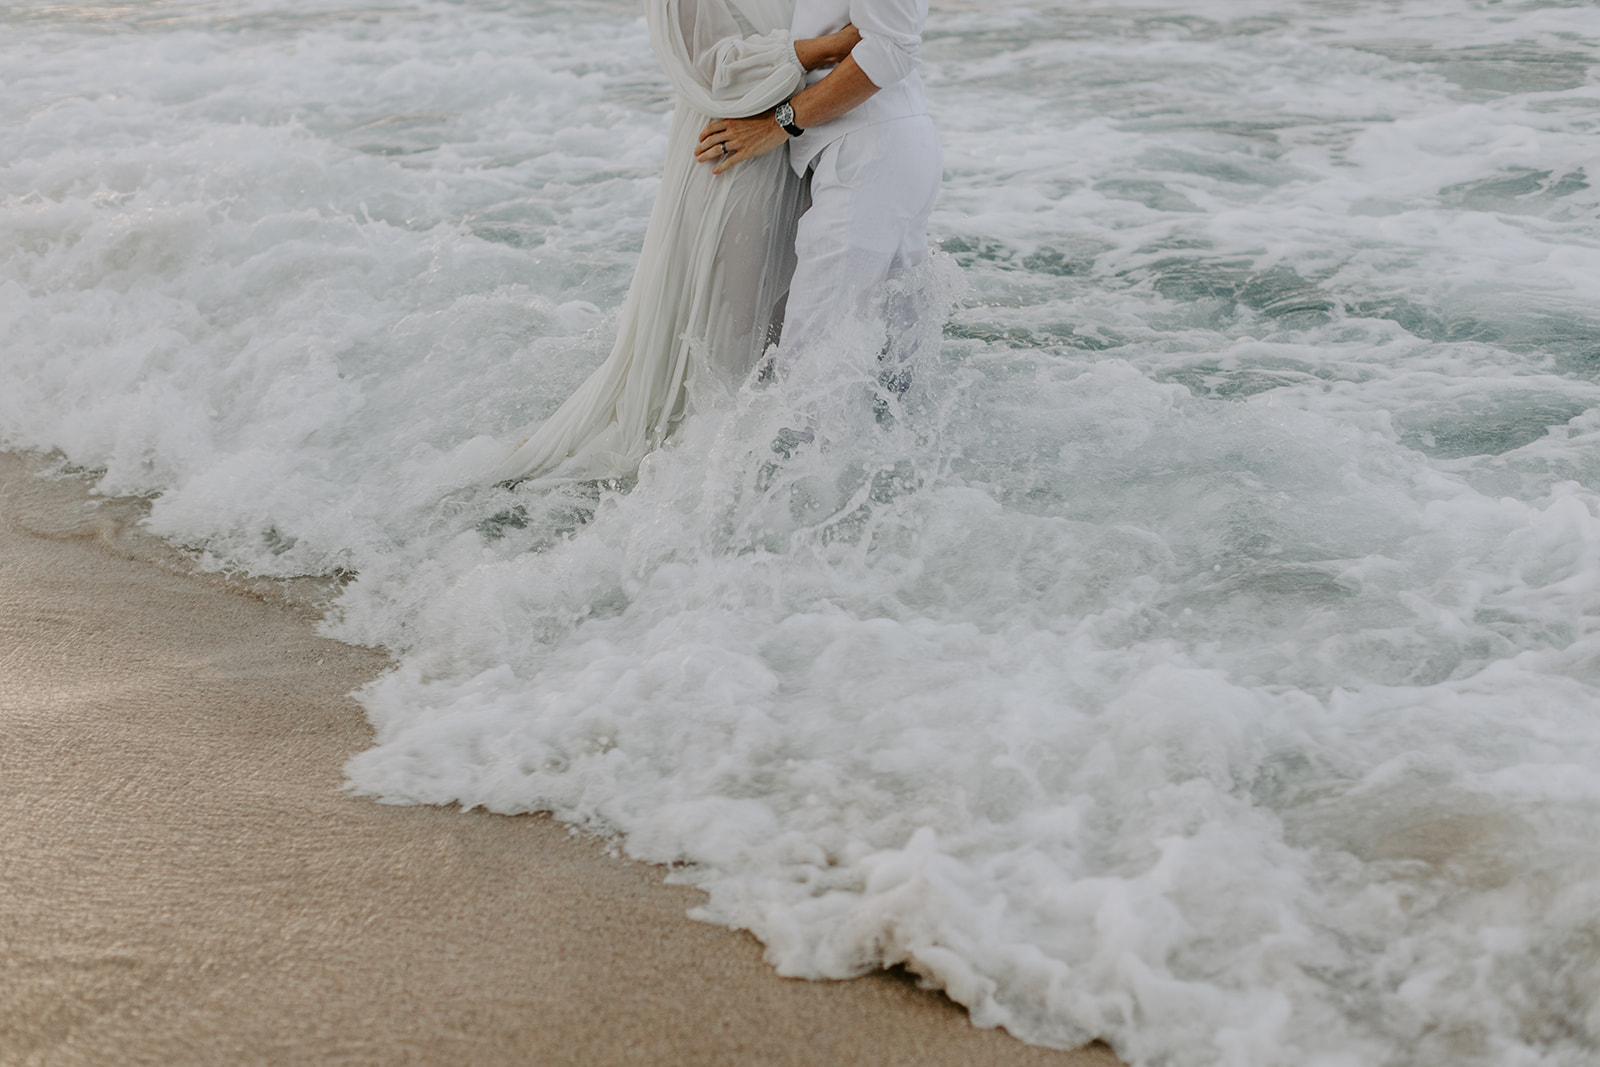 A trash the dress session for a couples in Hawaii who exchanged their vows on the beach 